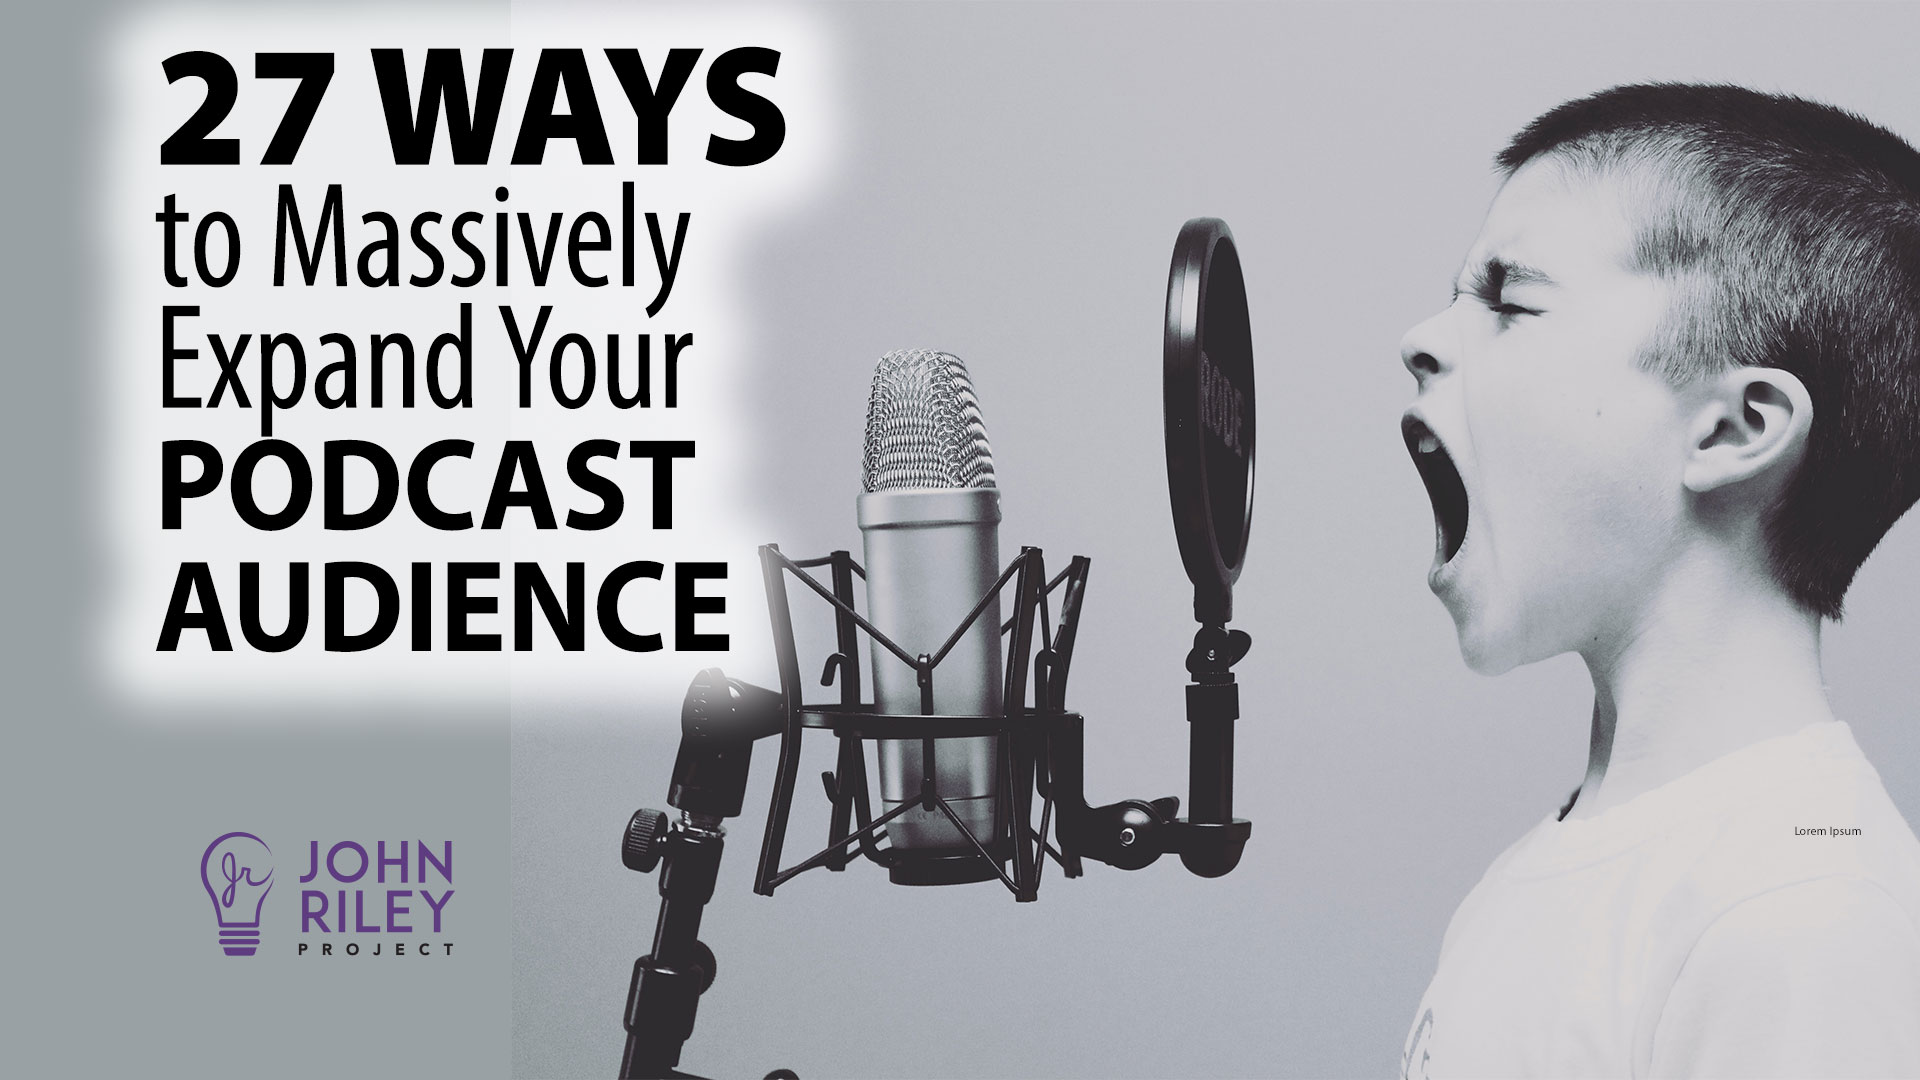 podcast marketing, build audience, john riley project